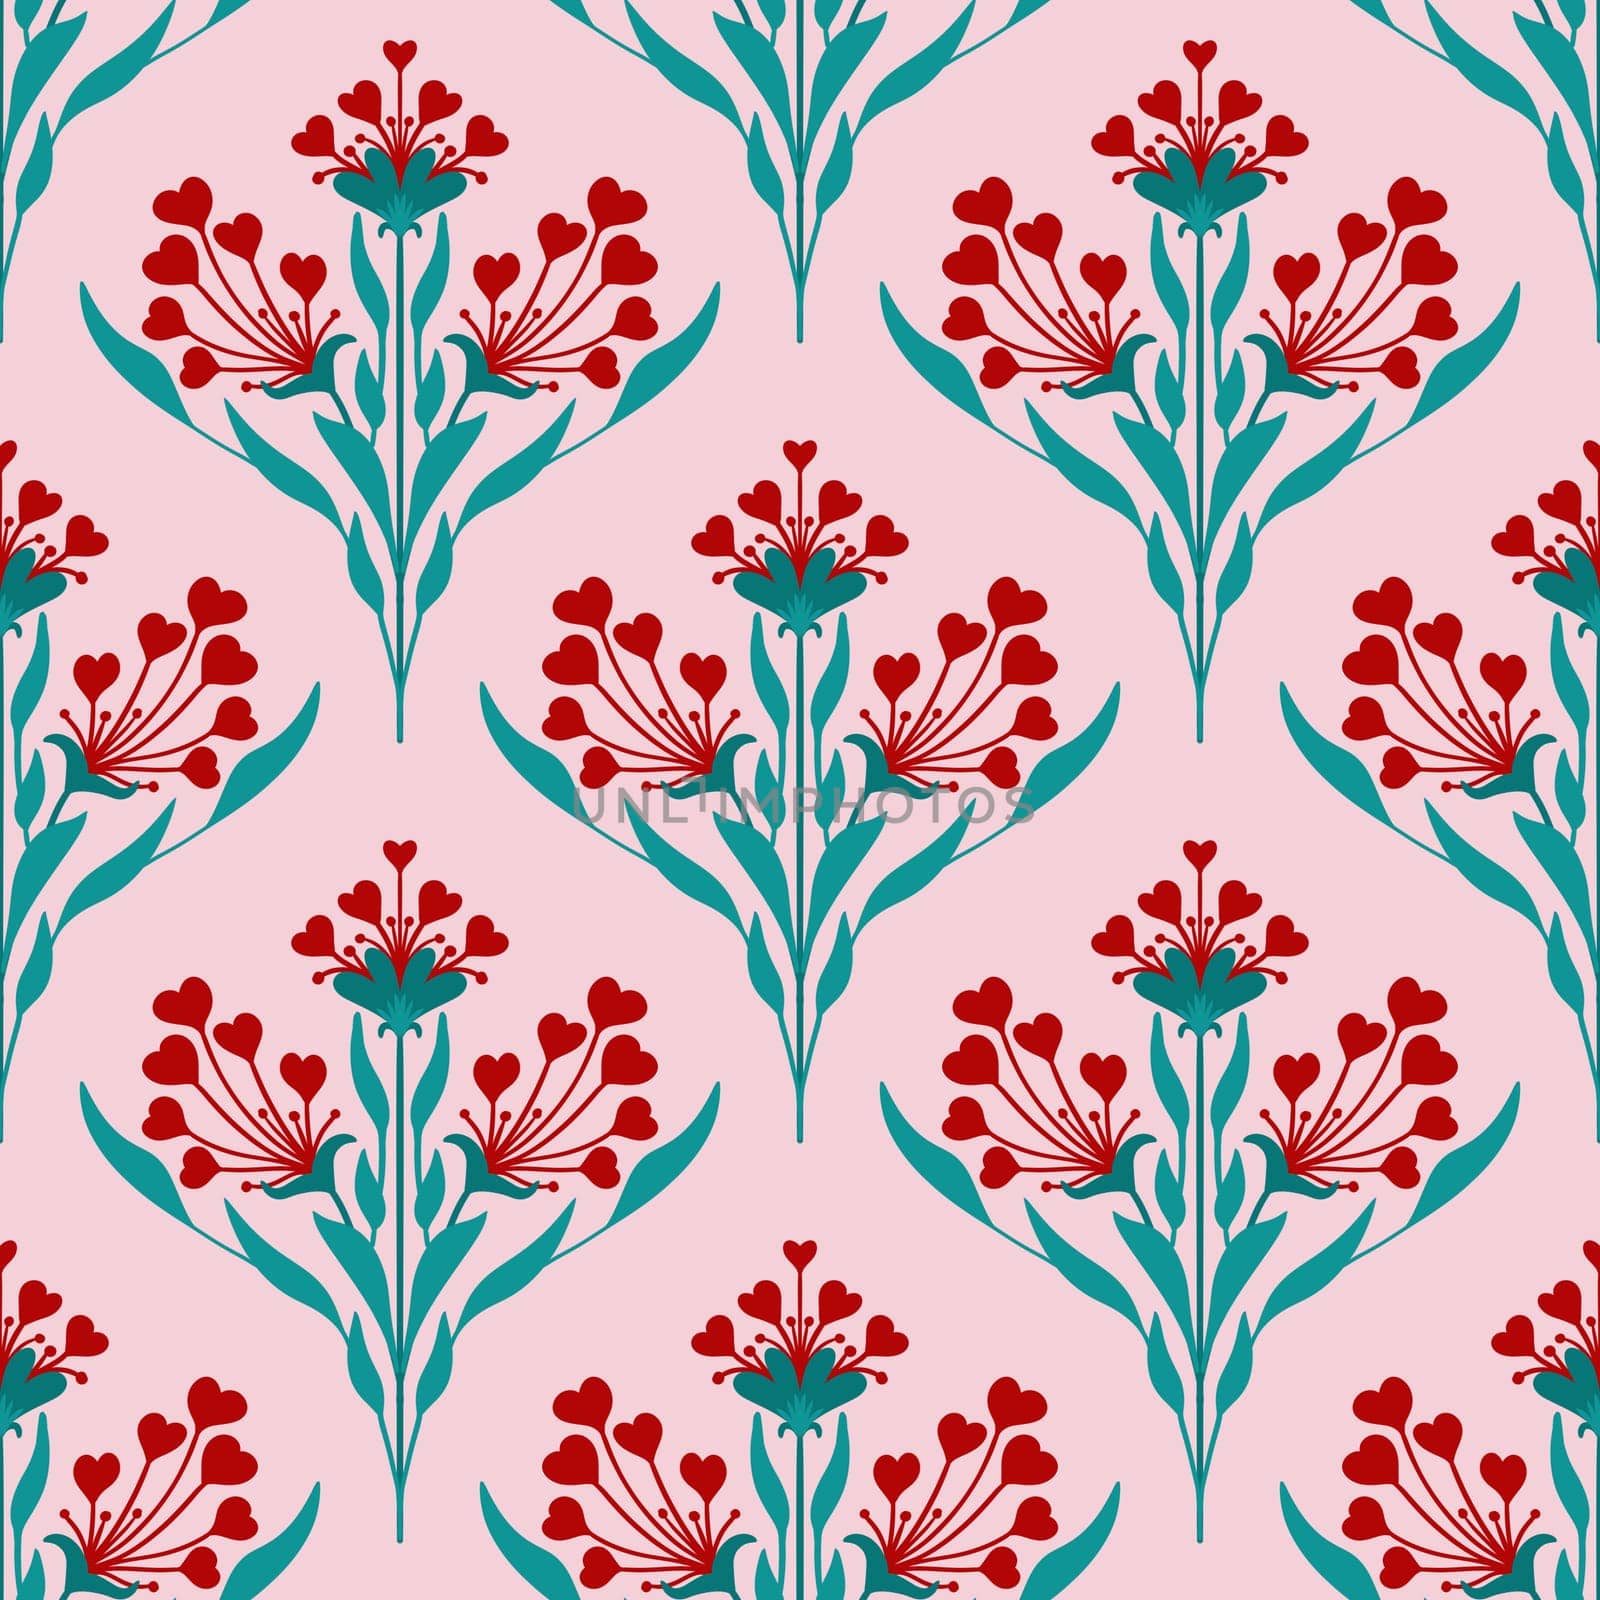 Hand drawn seamless pattern in flower floral st Valentine day style. Elegant colorful love retro vintage design, victorian fabric print, red hearts white emerald green leaves lines, modern damask. by Lagmar